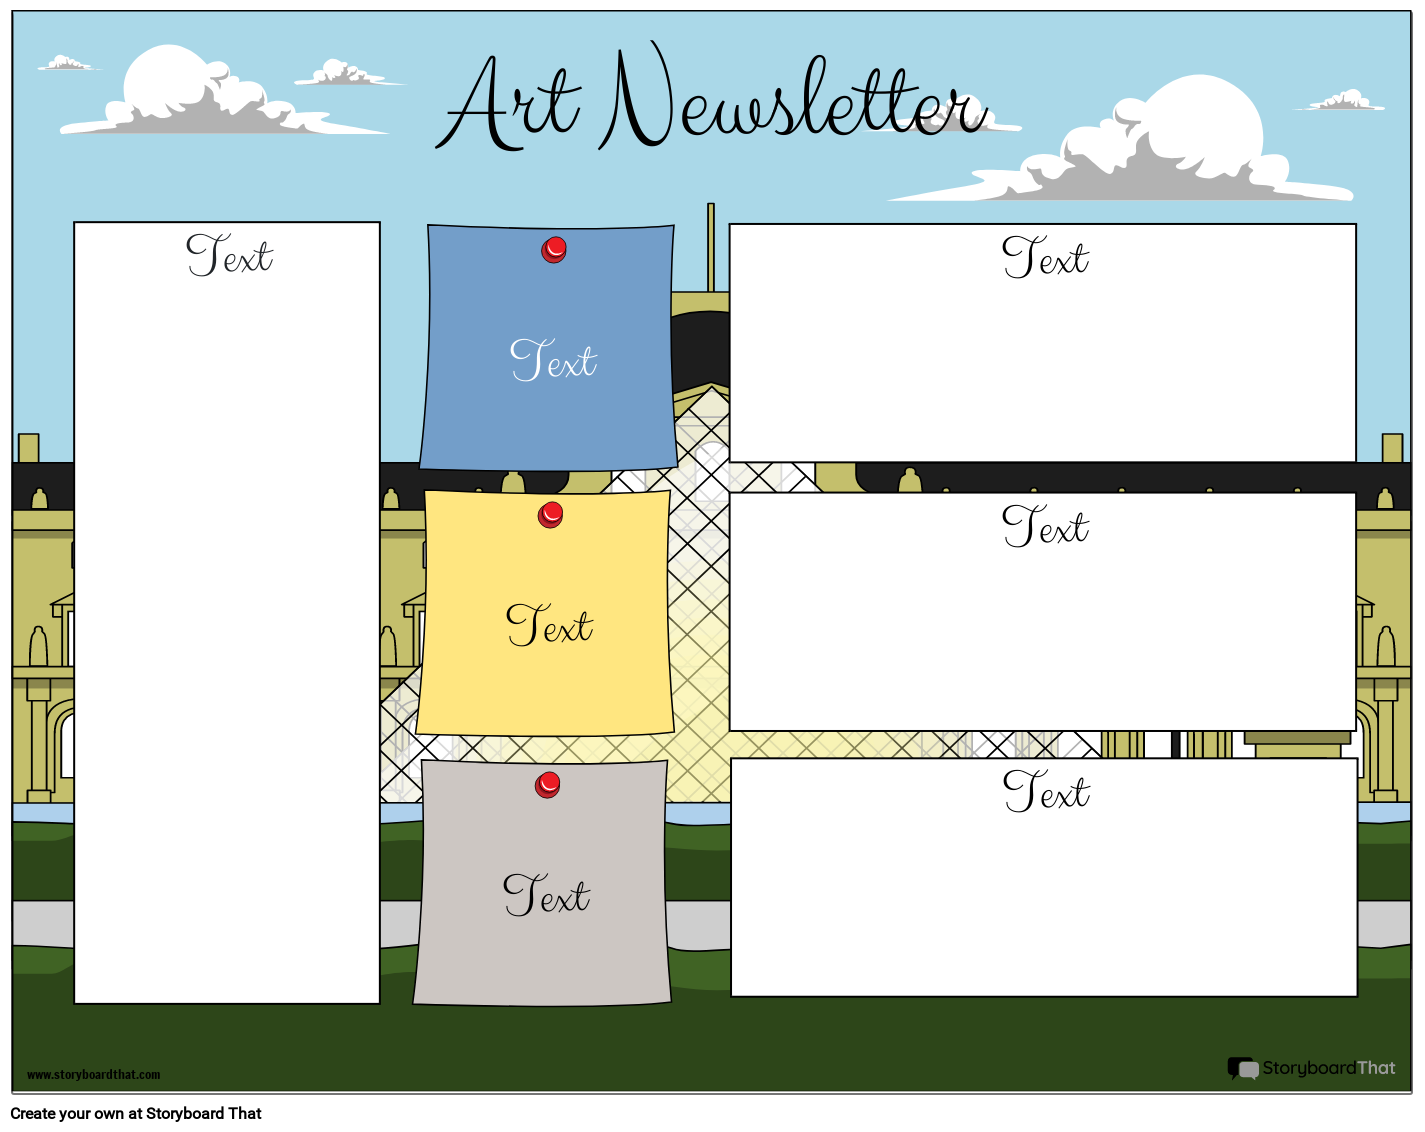 Newsletter Template Featuring a Big Mansion